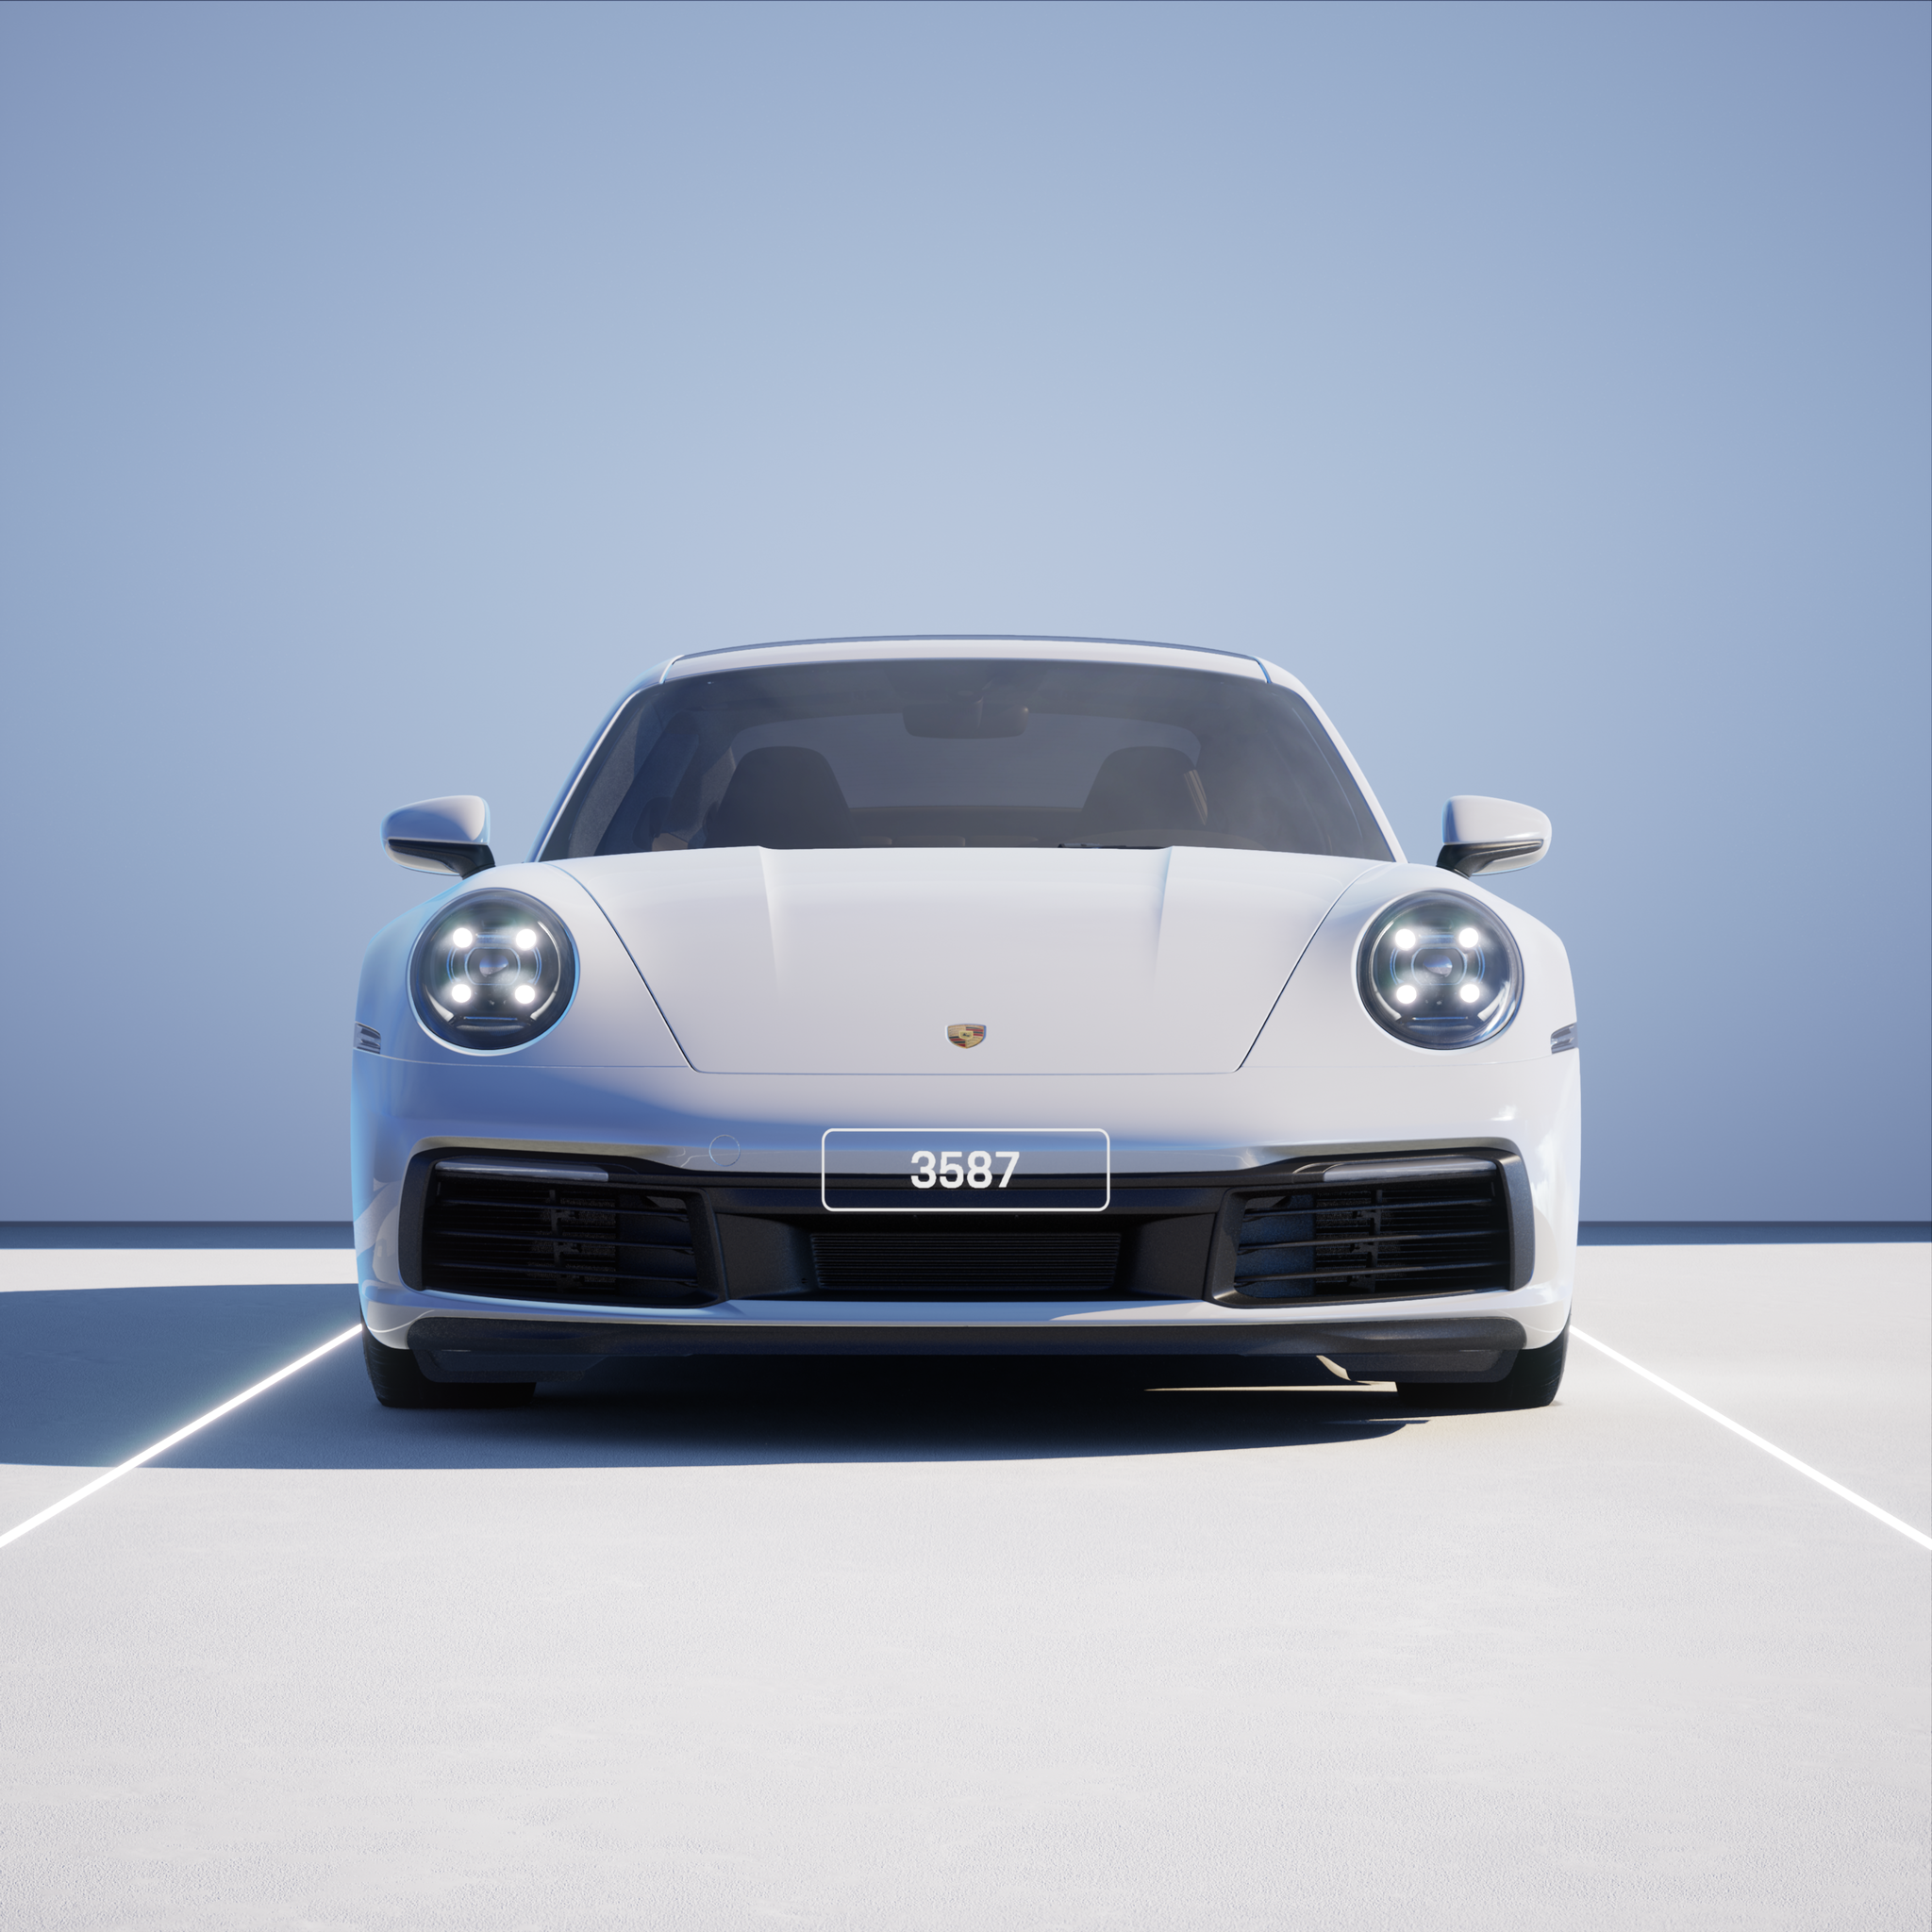 The PORSCHΞ 911 3587 image in phase